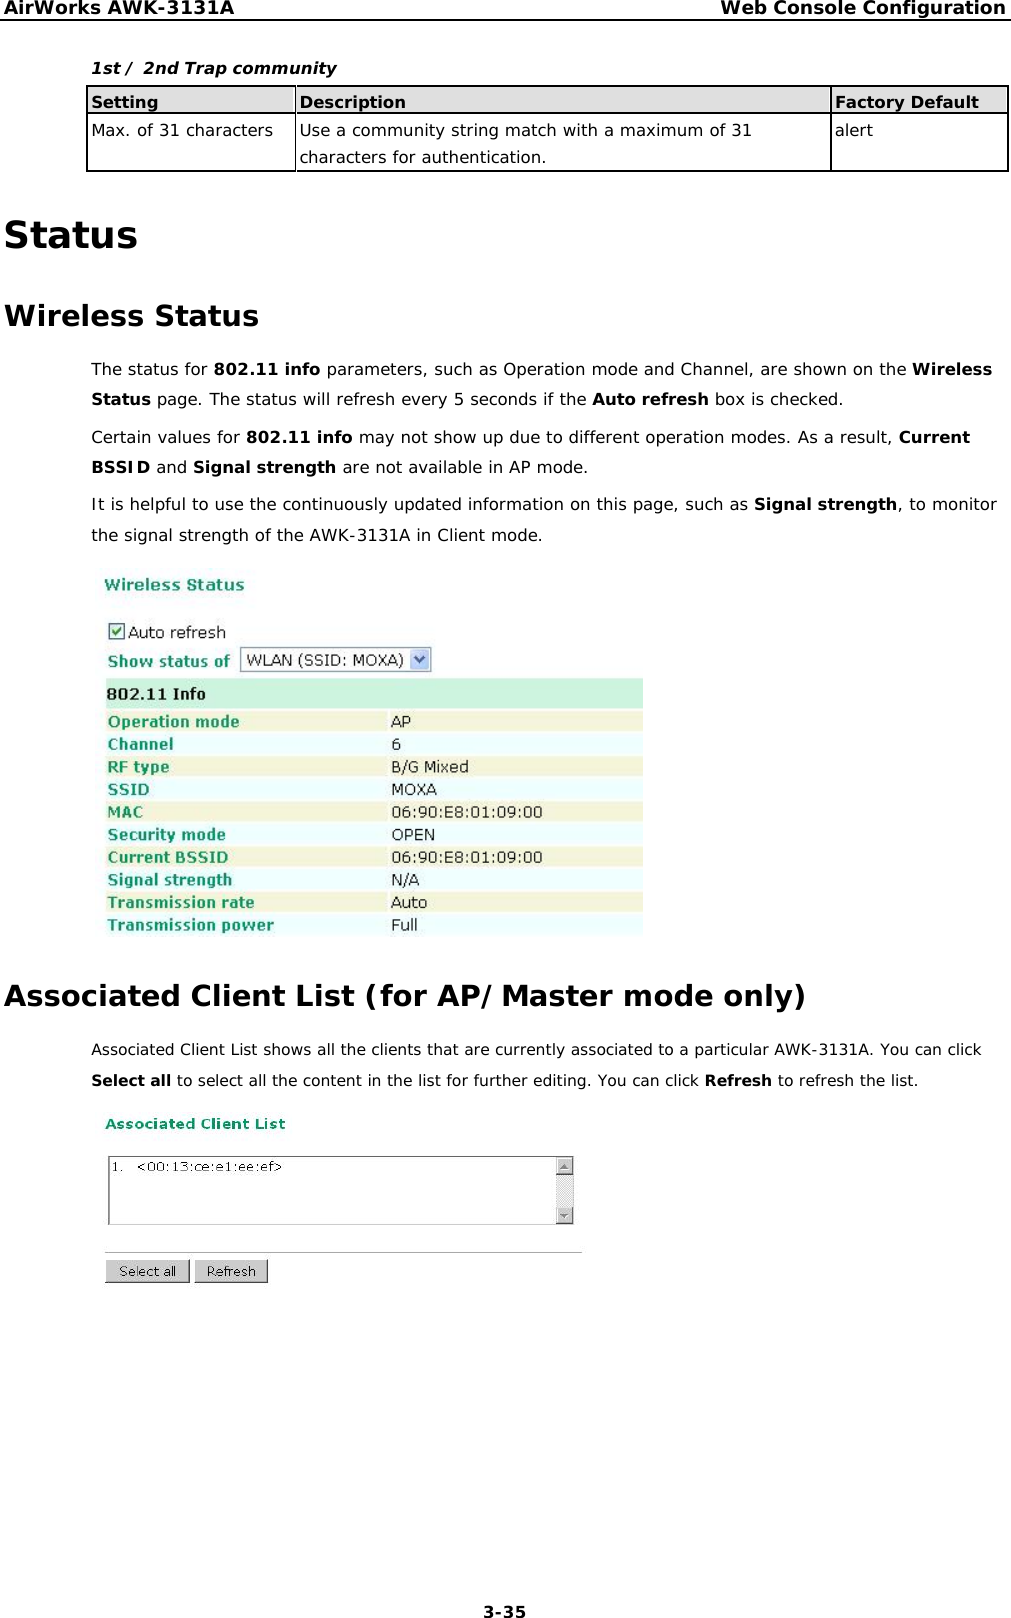 AirWorks AWK-3131A Web Console Configuration 1st / 2nd Trap community         Setting Description Factory Default Max. of 31 characters Use a community string match with a maximum of 31 alert    characters for authentication.            Status  Wireless Status  The status for 802.11 info parameters, such as Operation mode and Channel, are shown on the Wireless Status page. The status will refresh every 5 seconds if the Auto refresh box is checked.  Certain values for 802.11 info may not show up due to different operation modes. As a result, Current BSSID and Signal strength are not available in AP mode.  It is helpful to use the continuously updated information on this page, such as Signal strength, to monitor the signal strength of the AWK-3131A in Client mode.                     Associated Client List (for AP/Master mode only)  Associated Client List shows all the clients that are currently associated to a particular AWK-3131A. You can click Select all to select all the content in the list for further editing. You can click Refresh to refresh the list.                        3-35 